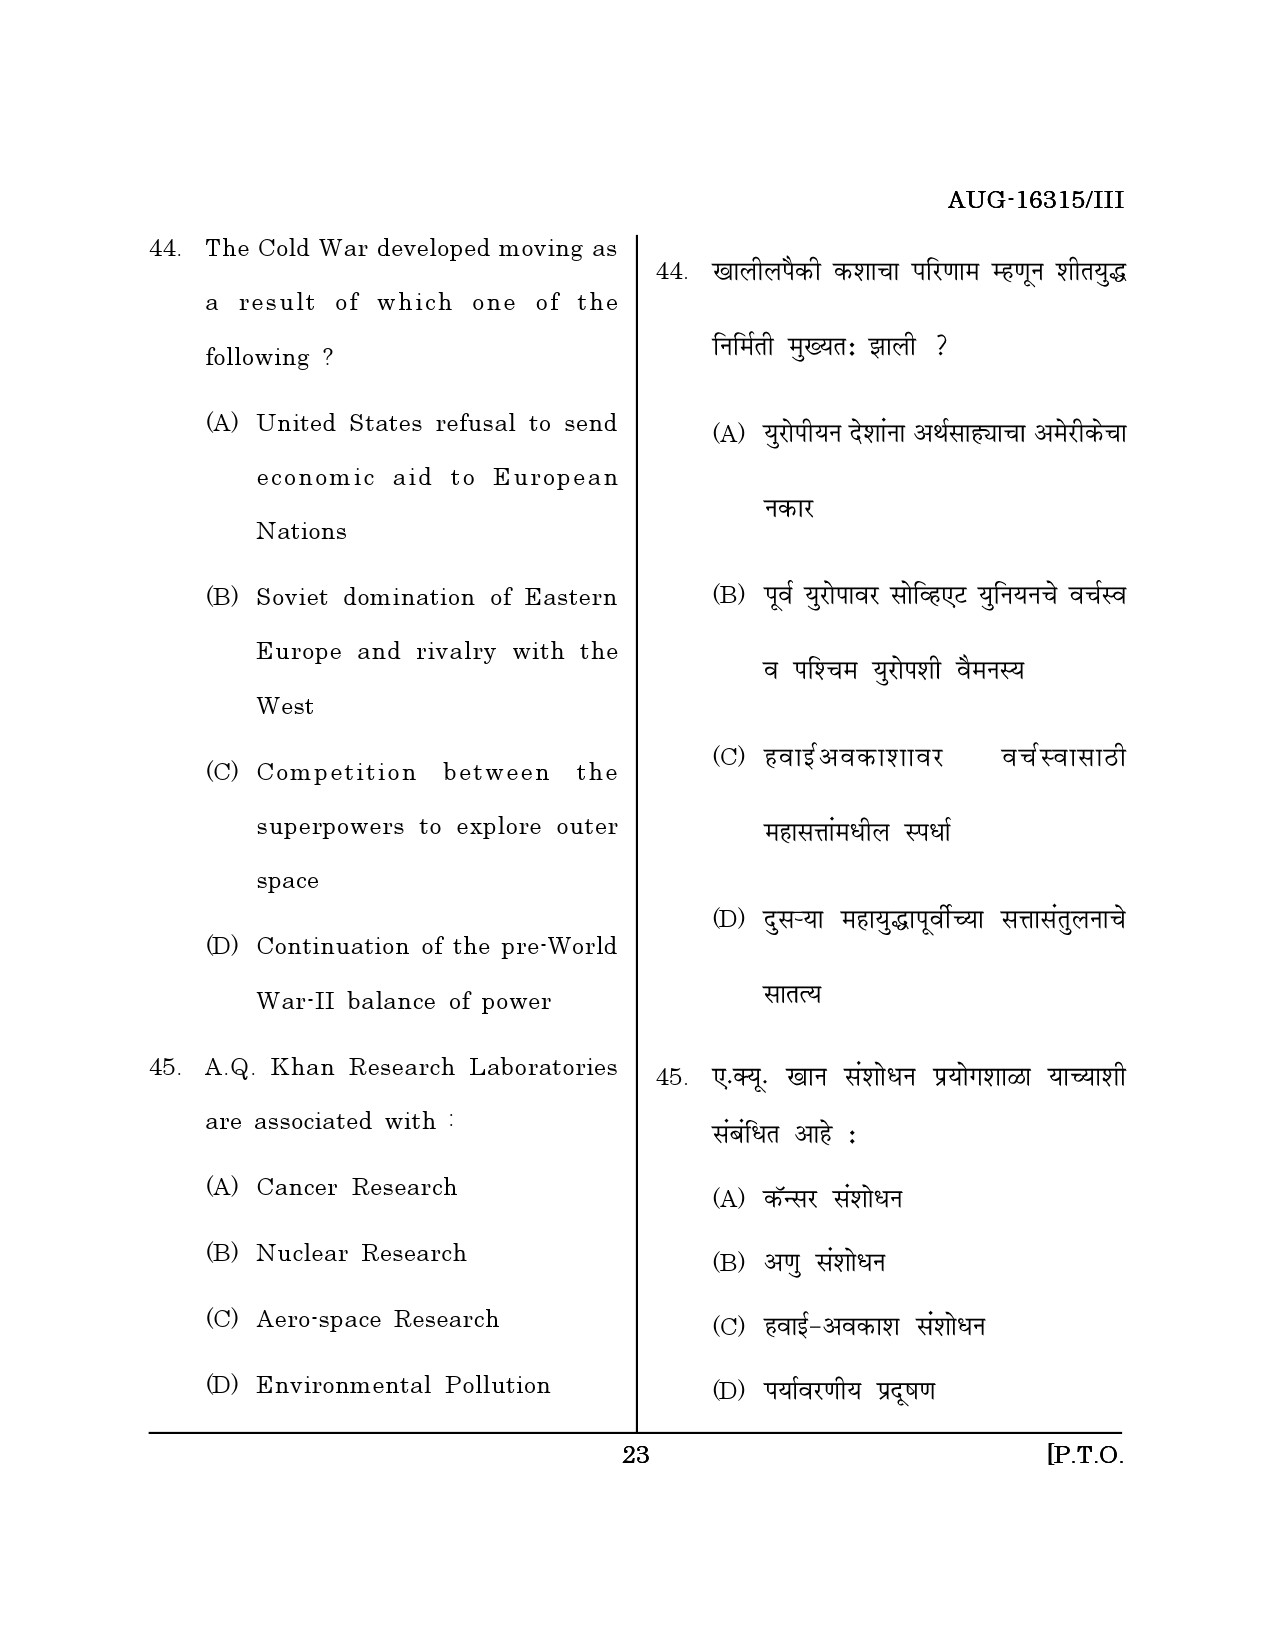 Maharashtra SET Defence and Strategic Studies Question Paper III August 2015 22